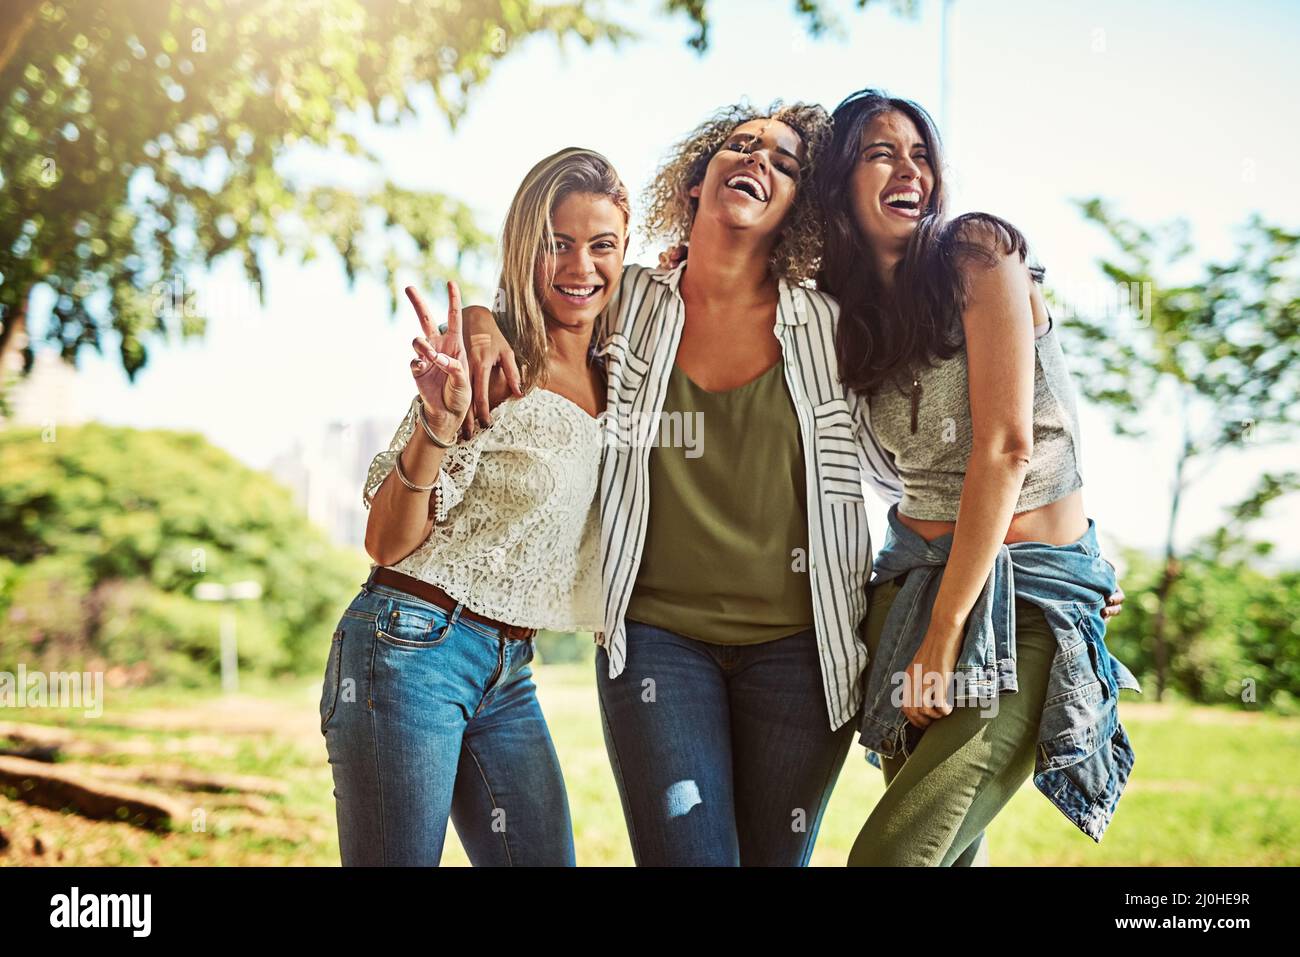 Girls day out has been such a blast. Portrait of a group of friends bonding together outdoors. Stock Photo